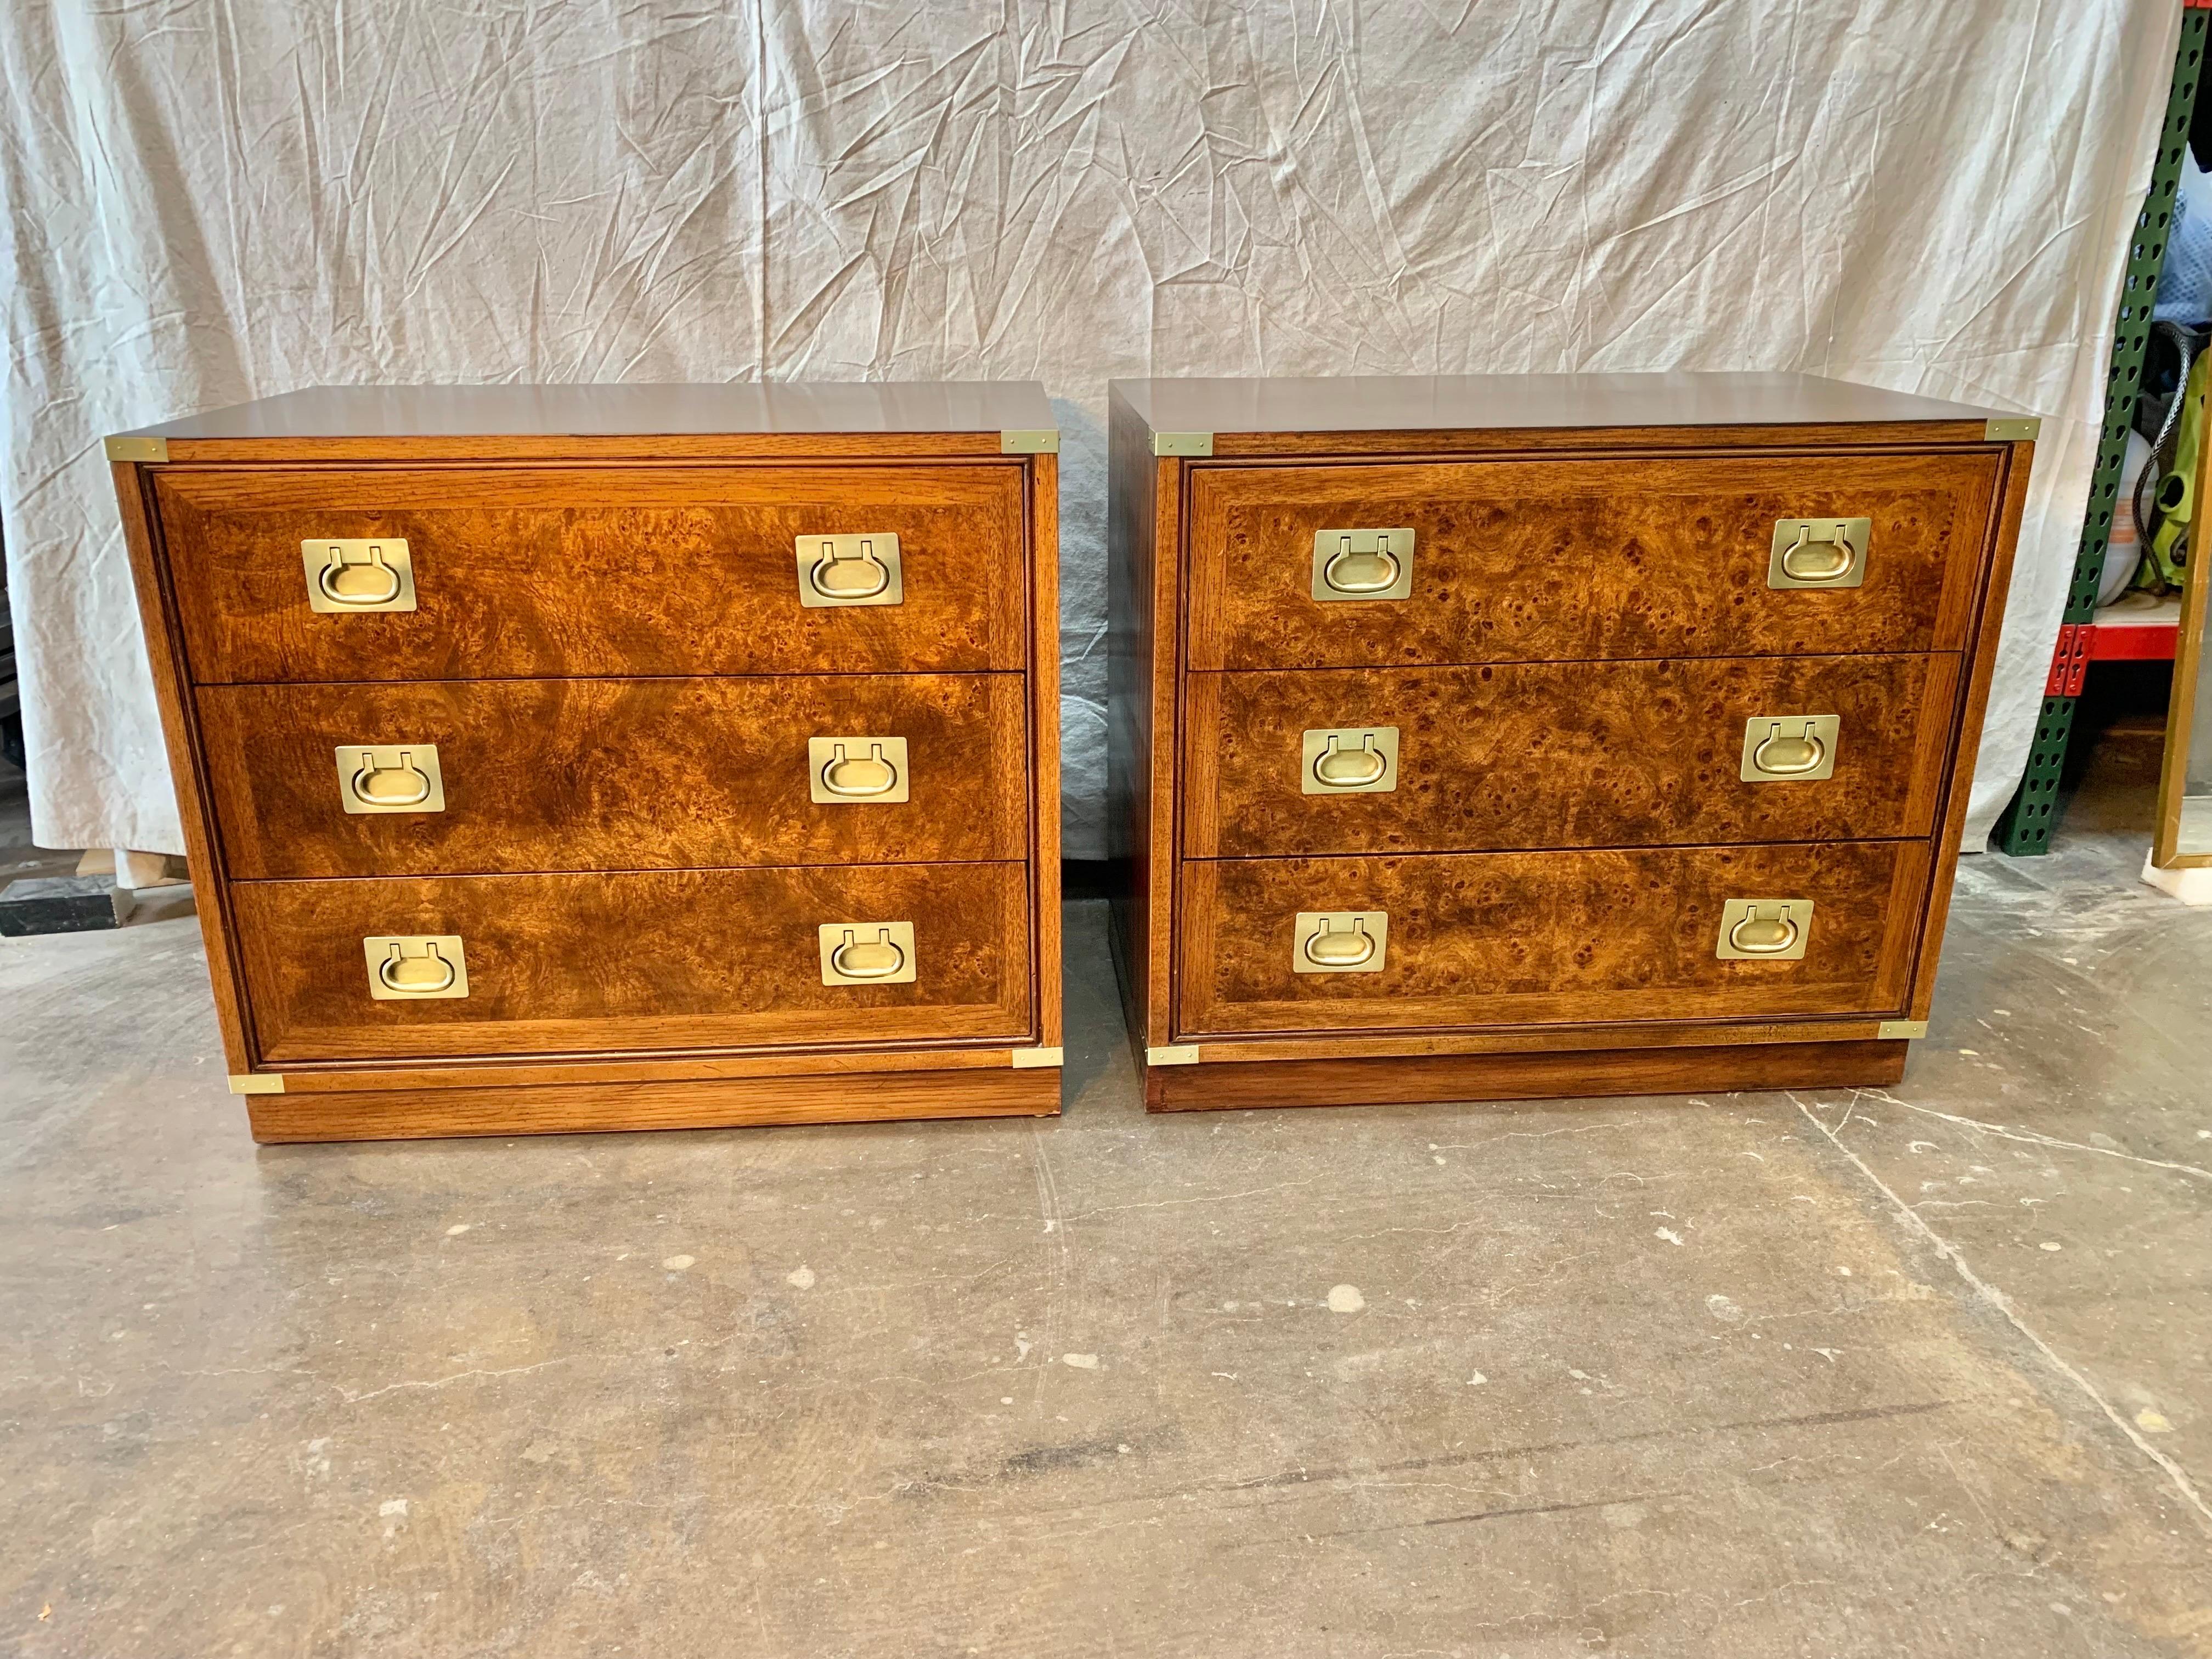 American Mid 20th C. Walnut, Burlwood and Brass Campaign Style Bachelor Chests - a Pair